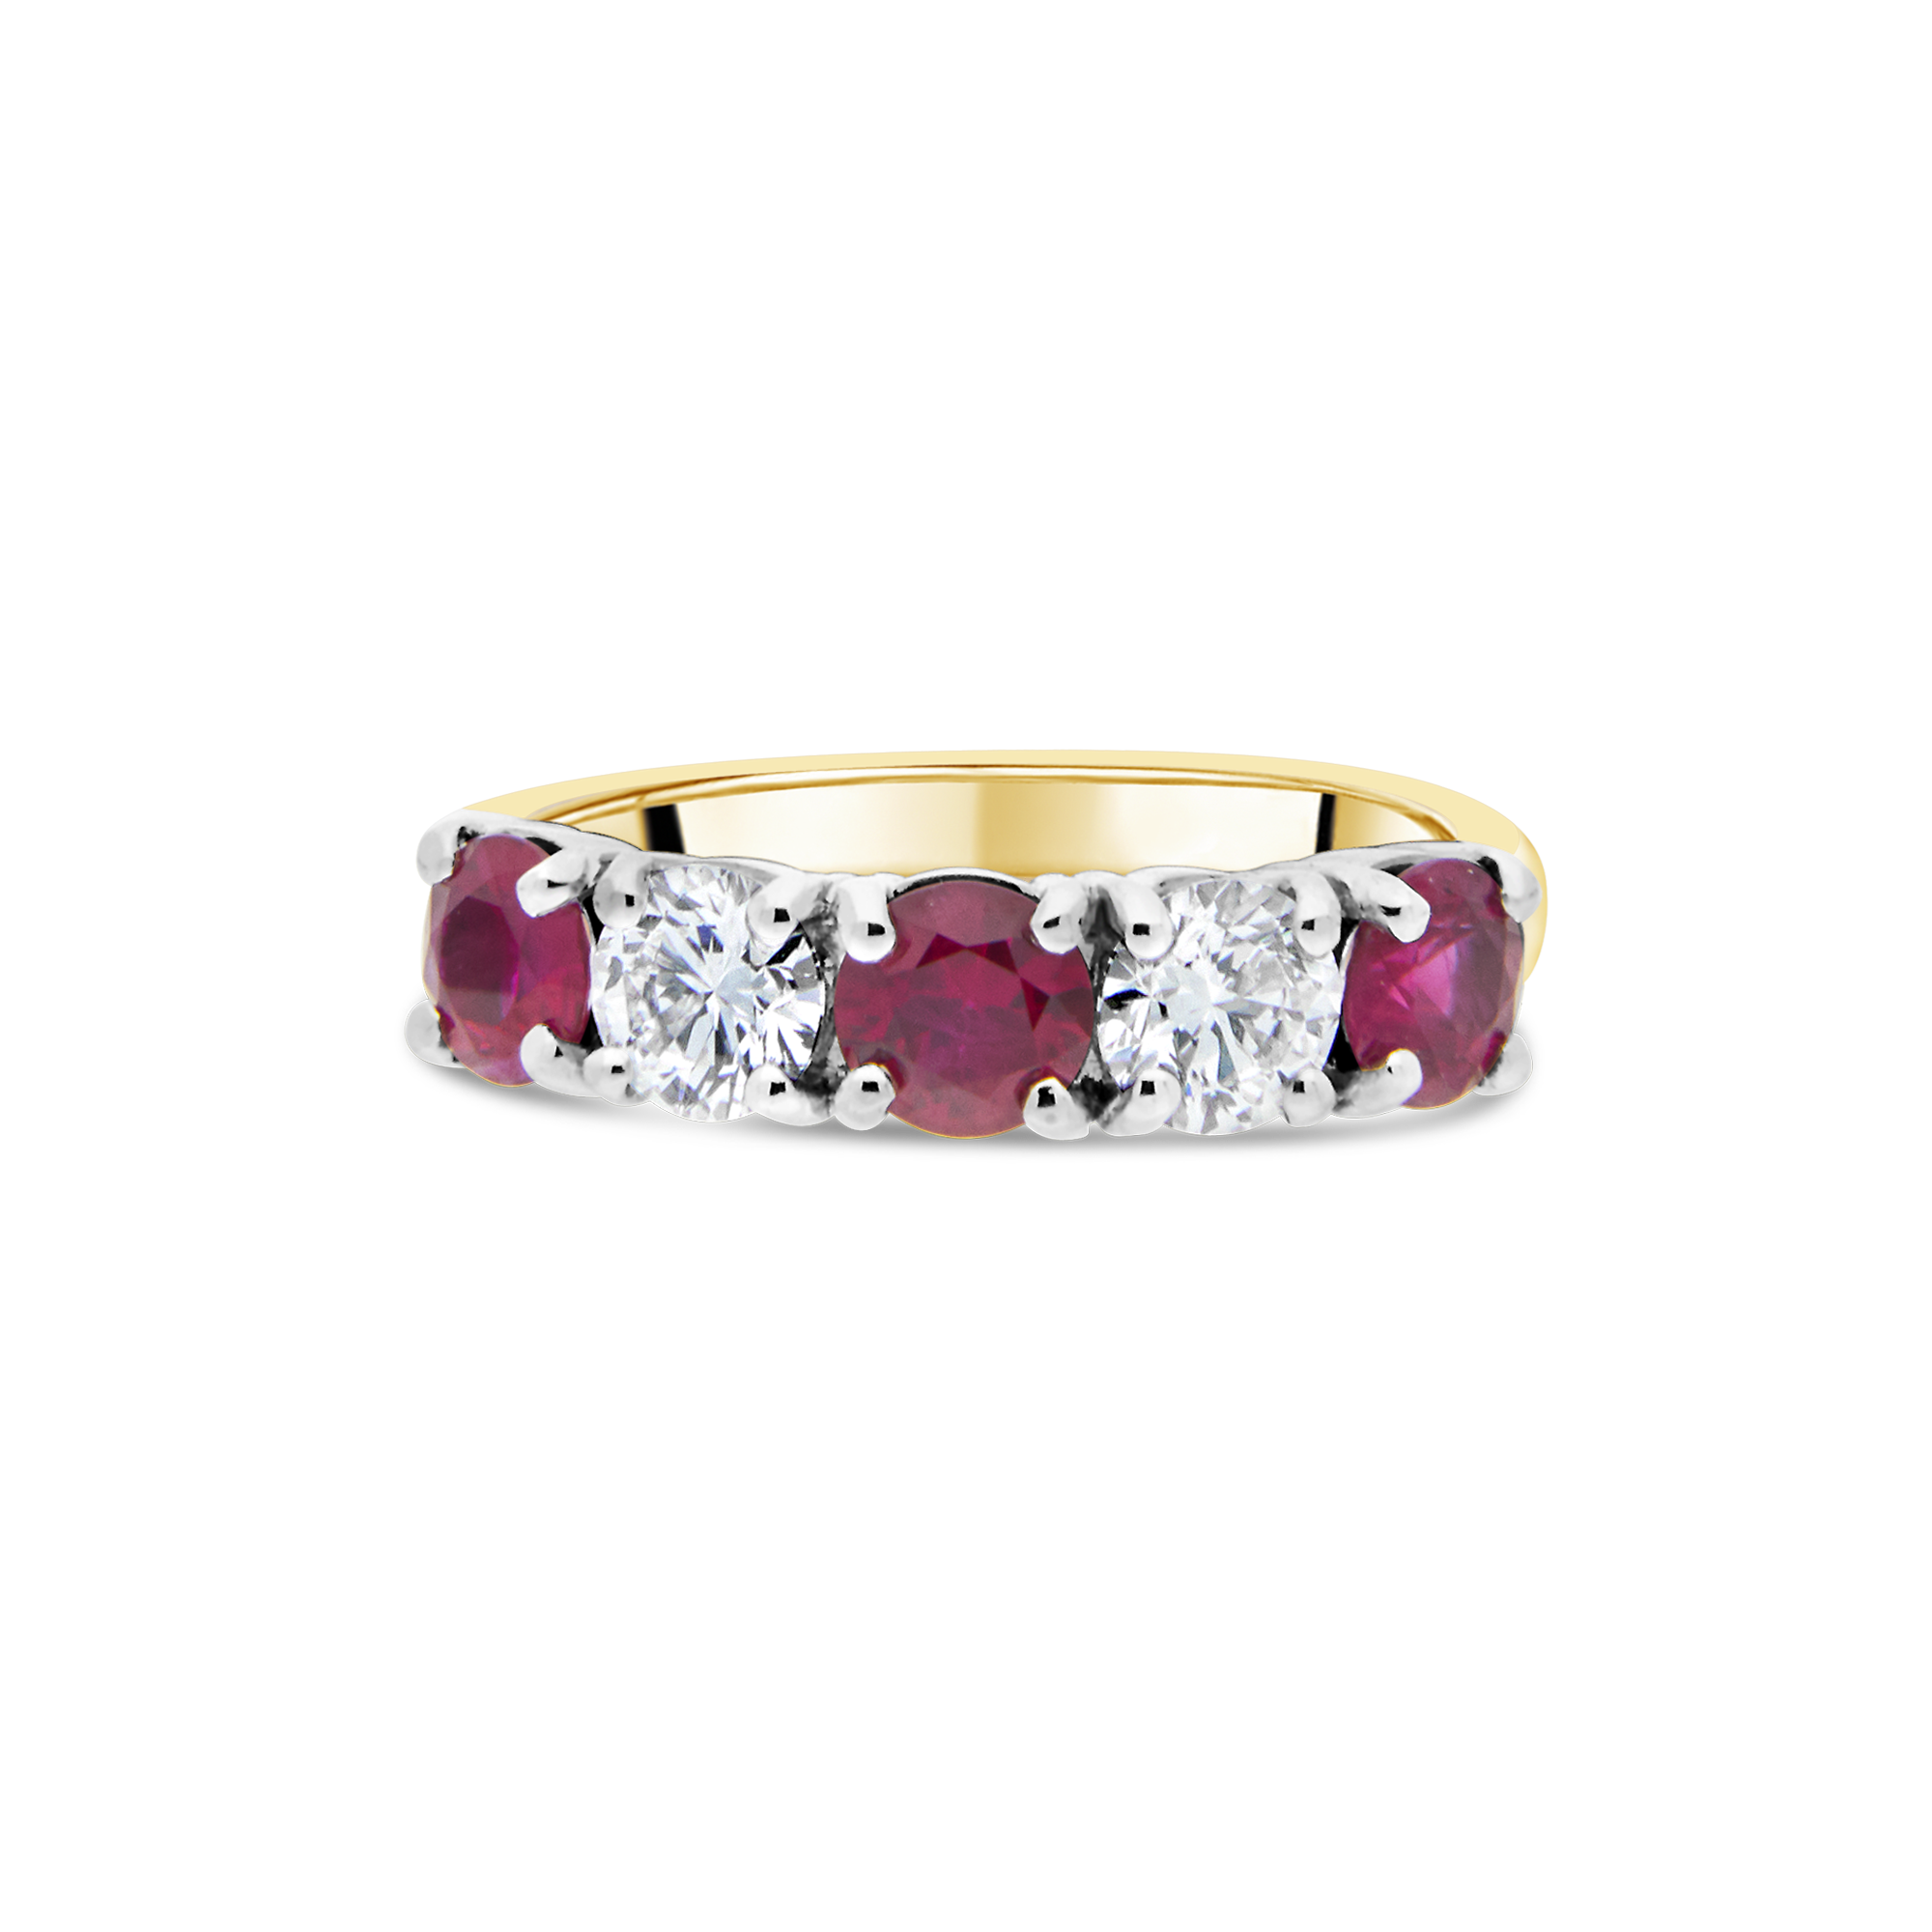 The "Galeria" Ruby and Diamond, Rose Gold